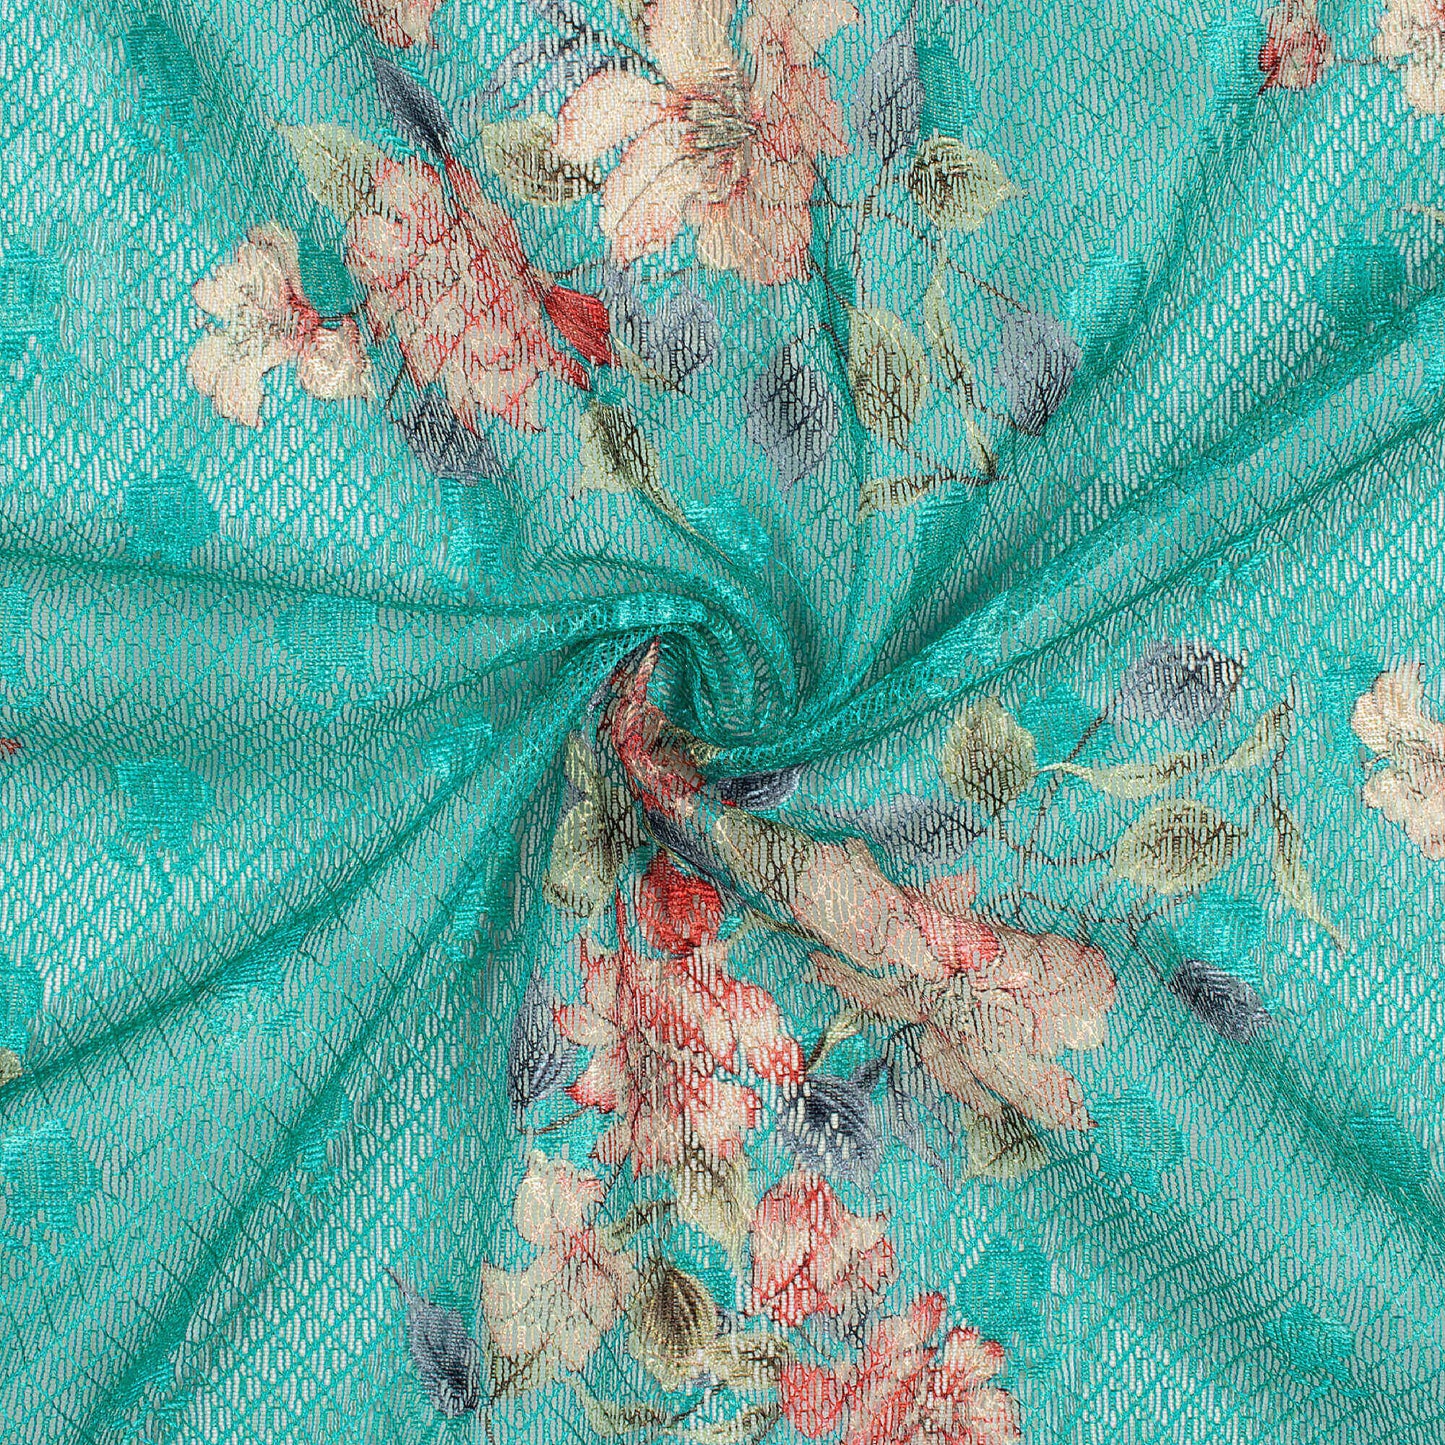 Bright Turquoise And Peach Floral Pattern Digital Print Booti Raschel Net Fabric (Width 58 Inches)